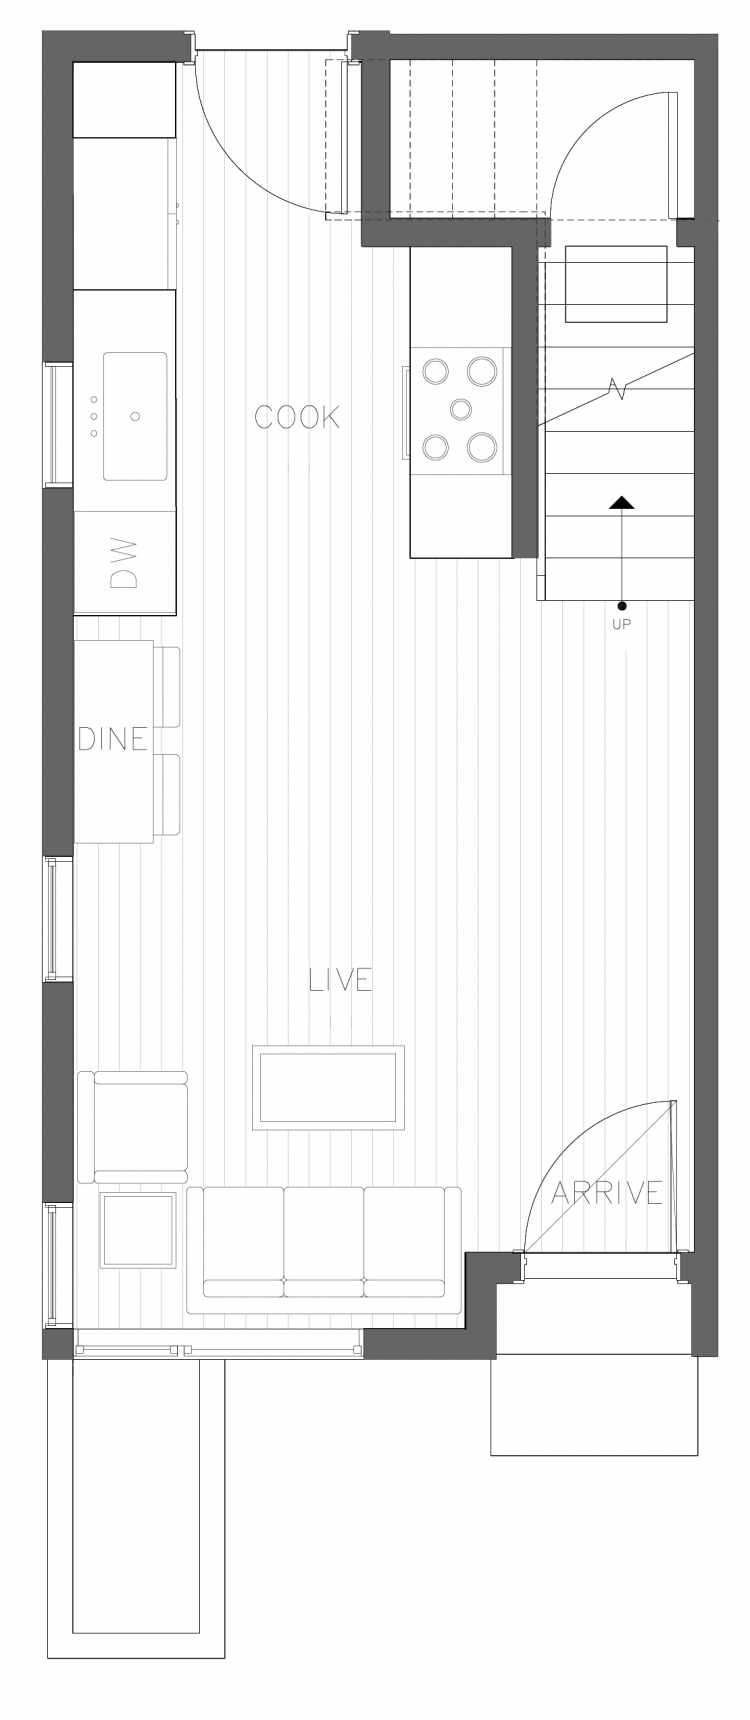 First Floor Plan of 1730C 11th Ave, One of the Altair Townhomes in Capitol Hill by Isola Homes